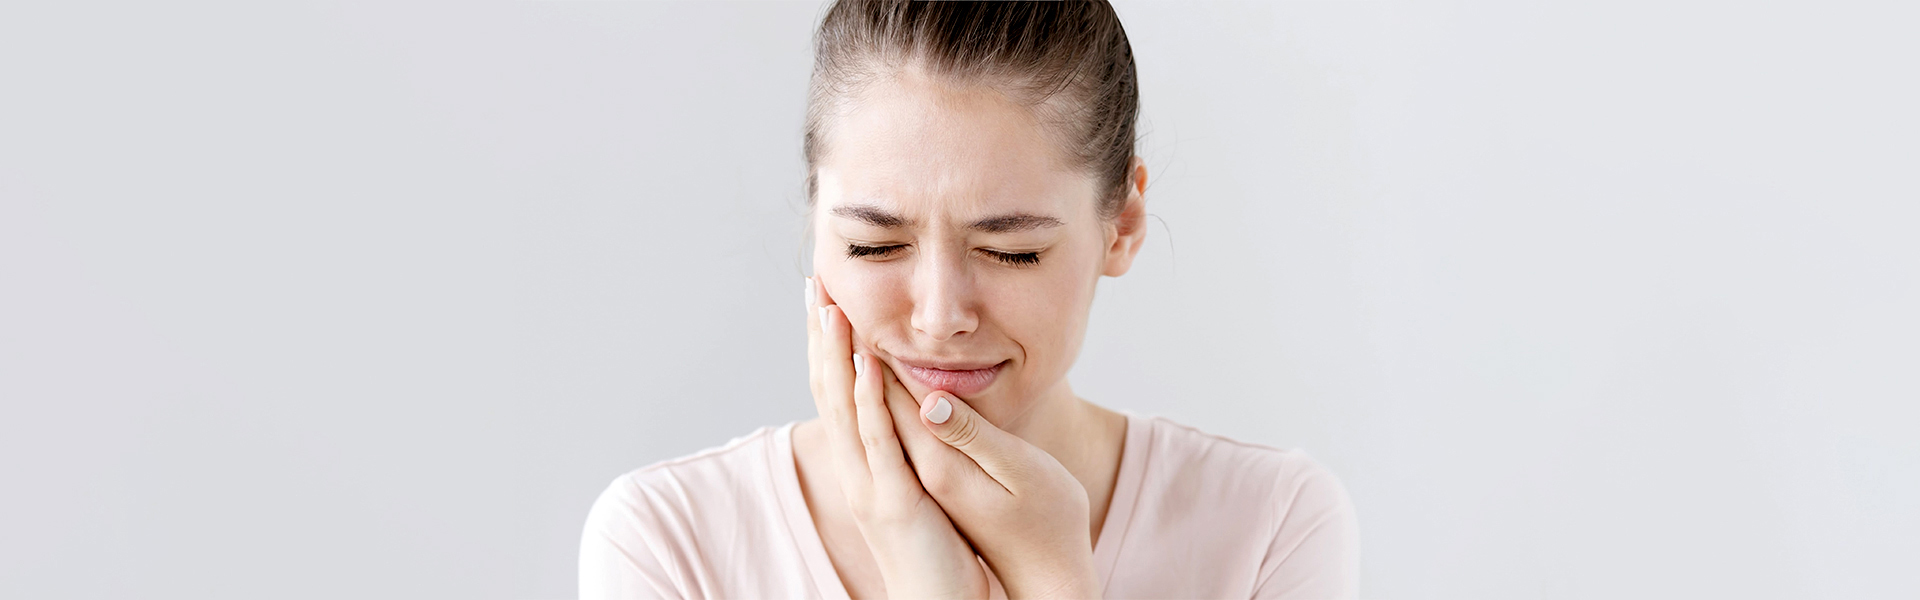 When Are Tooth Extractions Necessary in Dentistry?